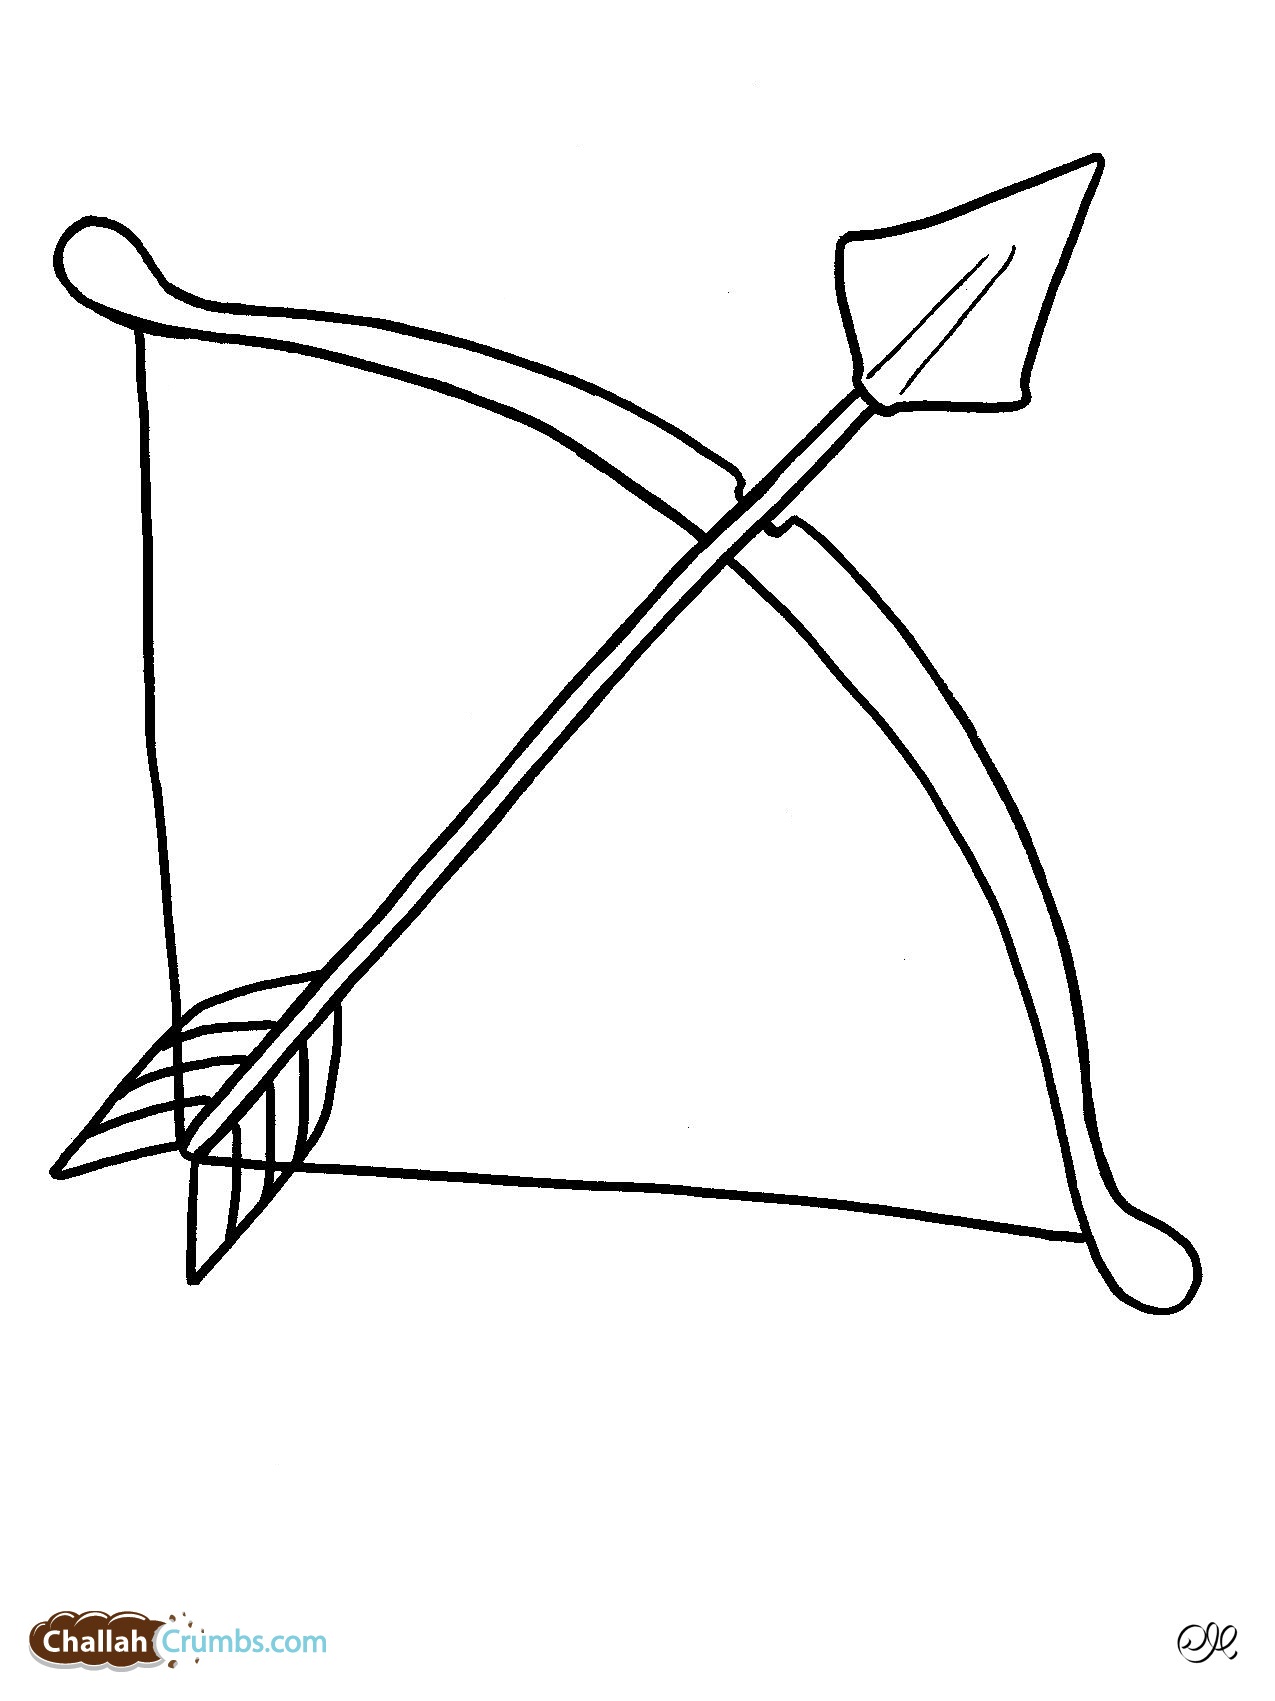 Bows and arrows coloring pages